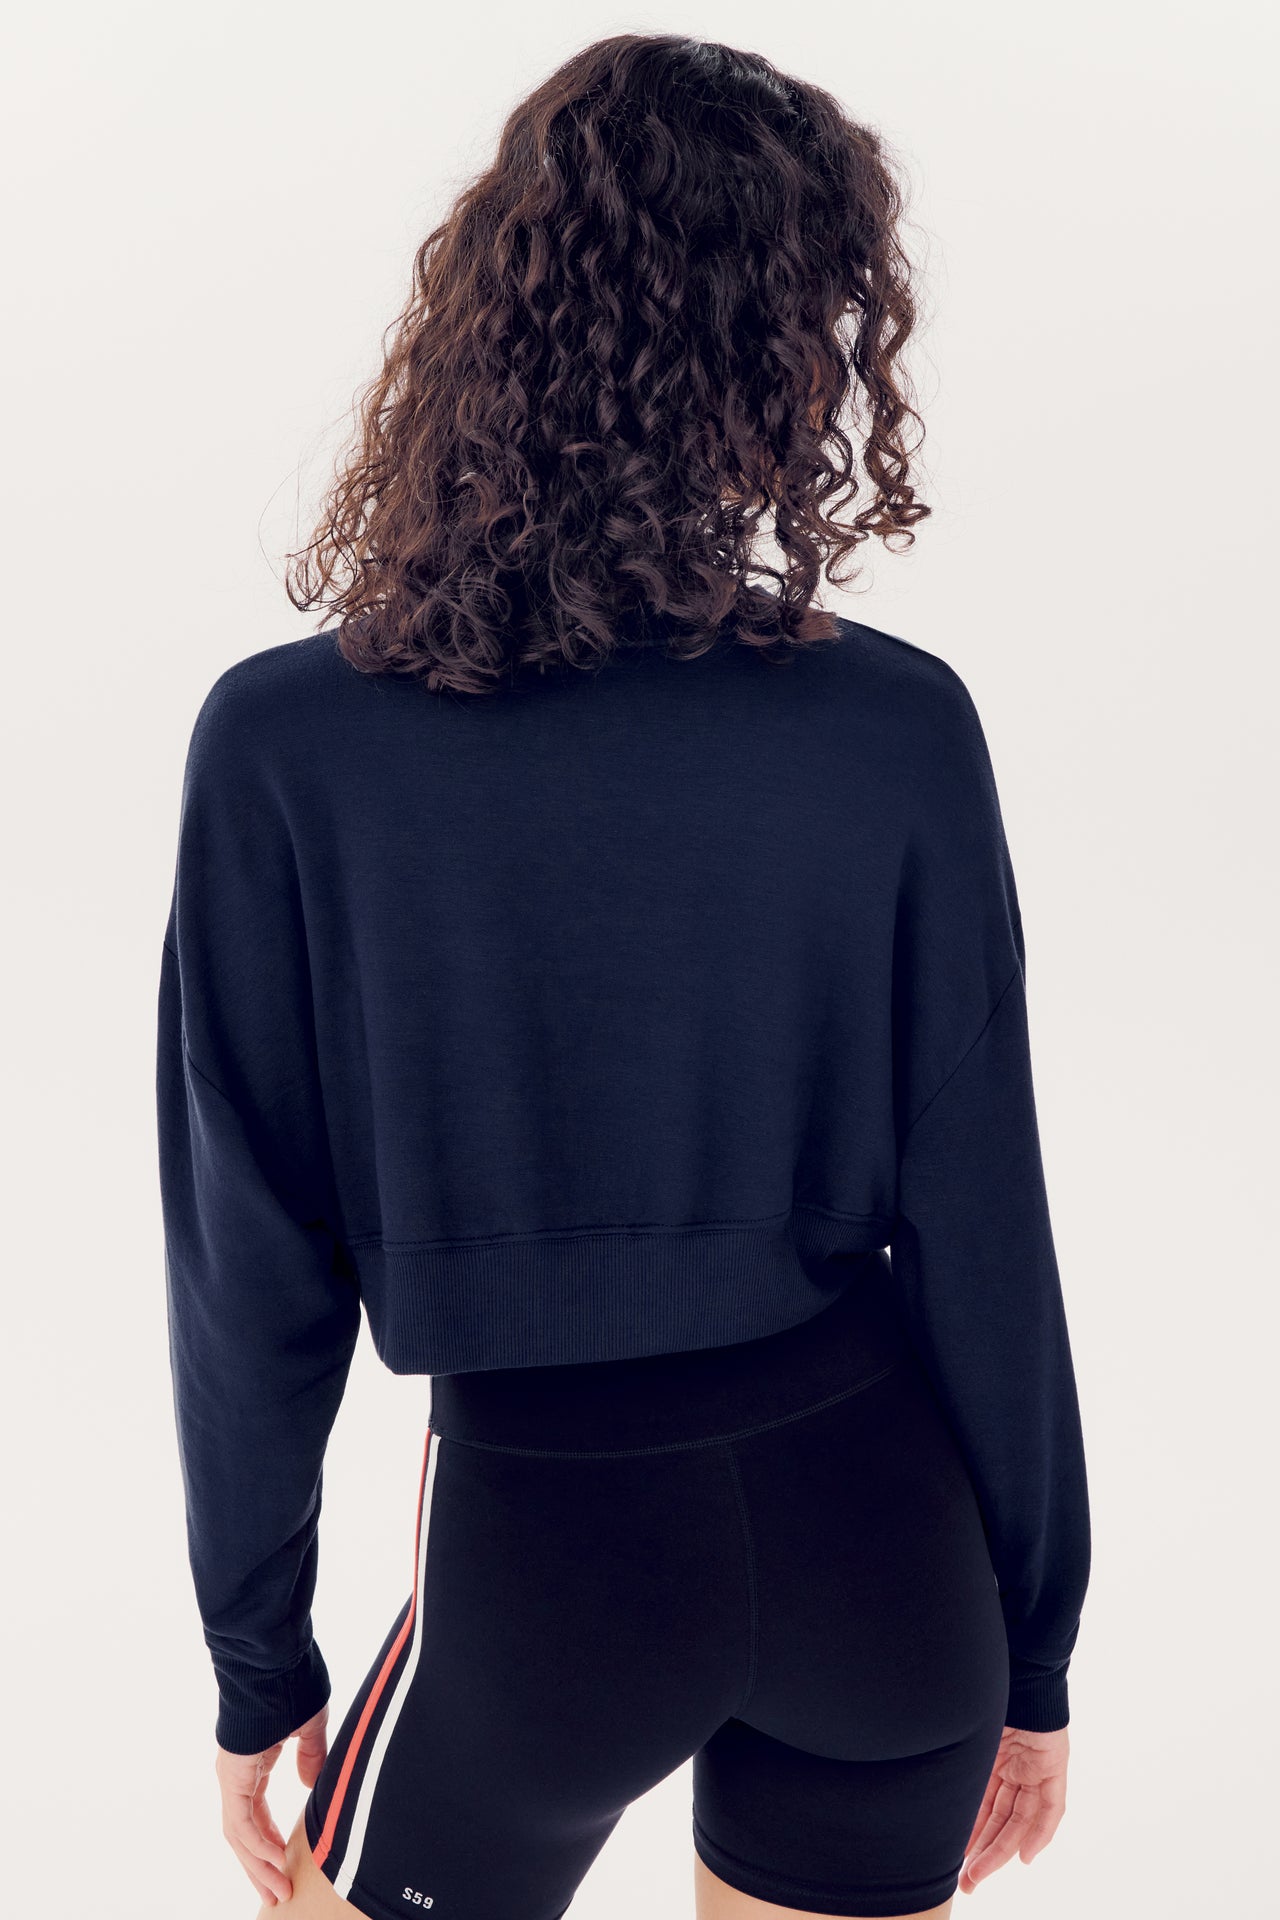 Woman from behind with curly hair, wearing a SPLITS59 Indigo Noah Fleece Crop Sweatshirt and black leggings with a red and white stripe.